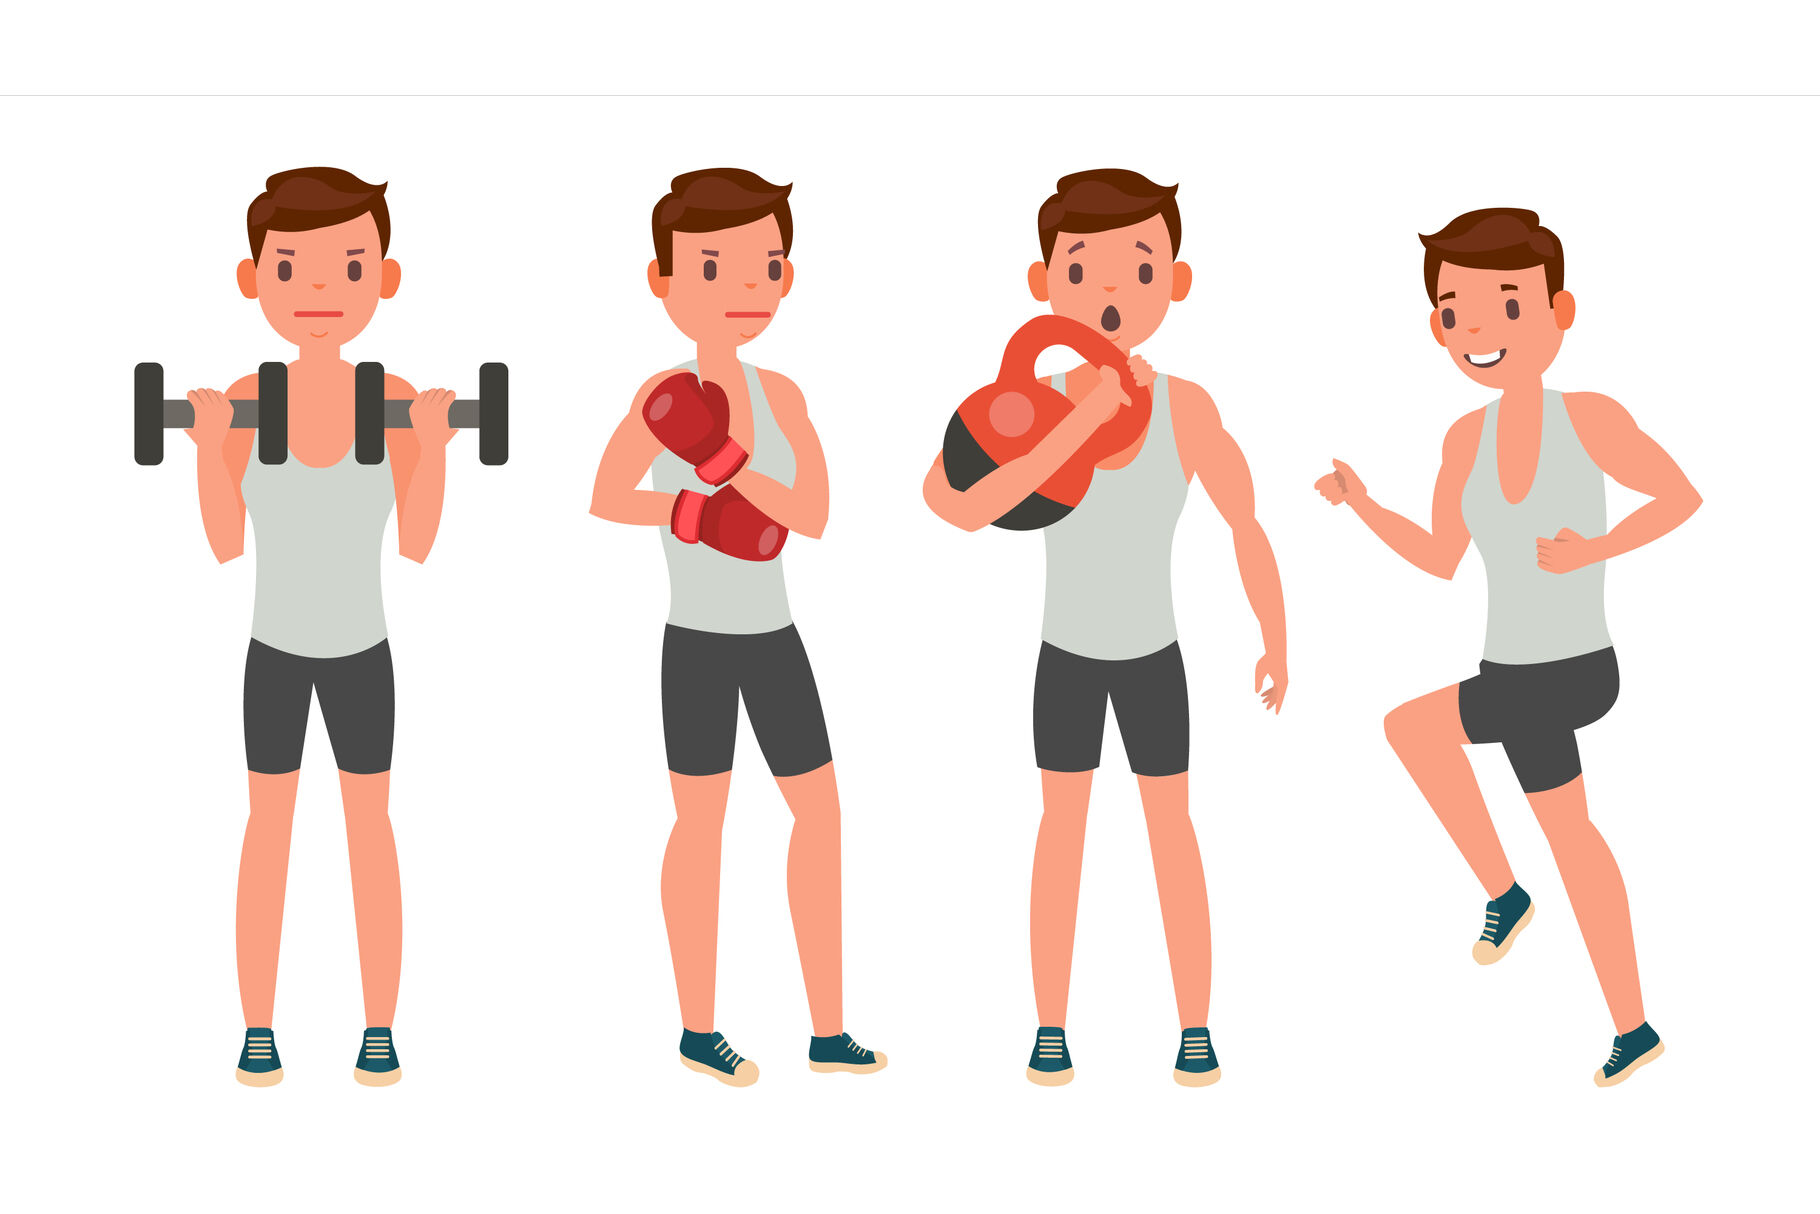 cartoon person working out